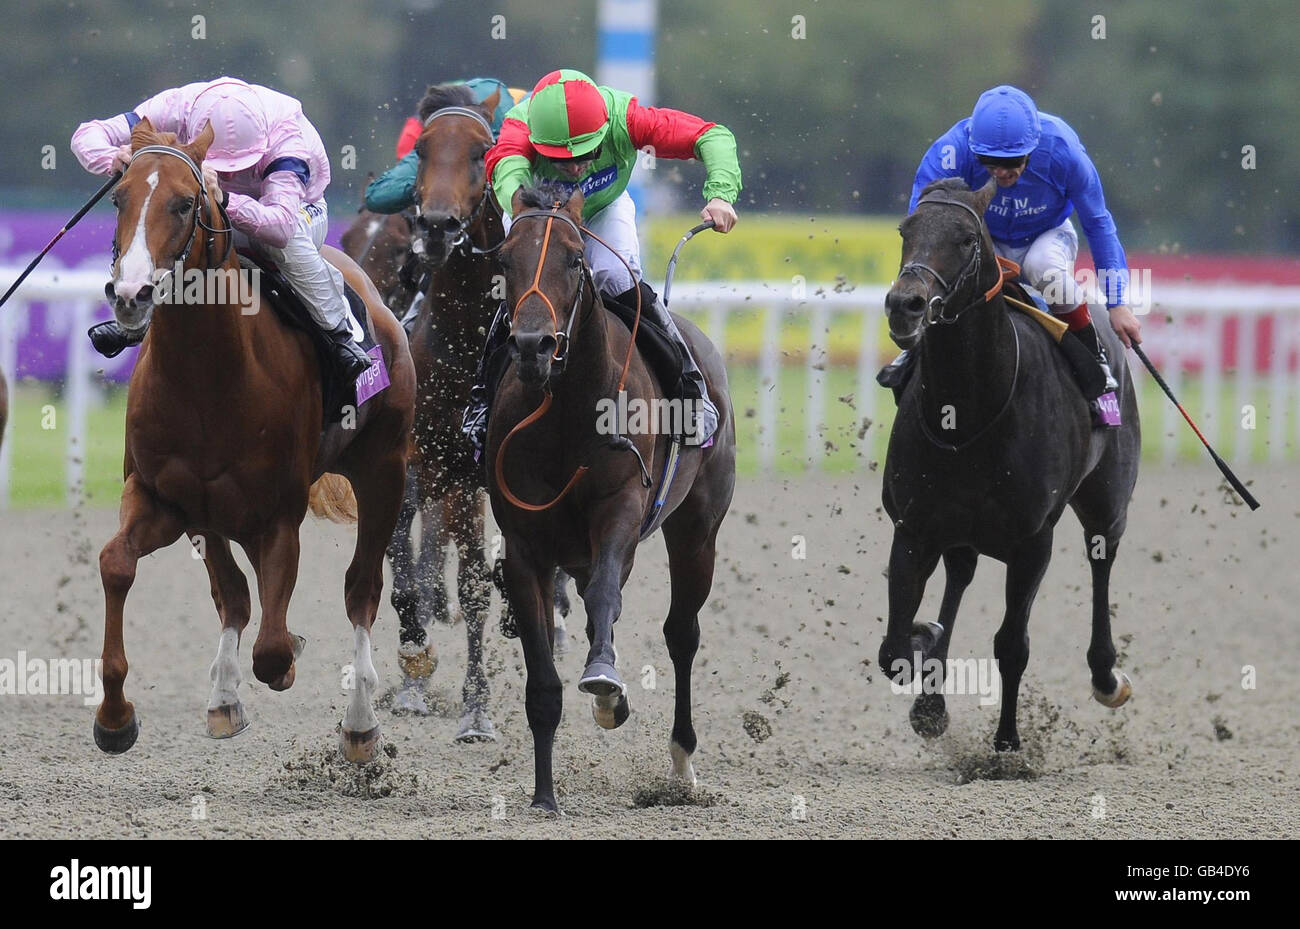 Elnawin and jockey Pat Dobbs (centre) win The toteswinger Sirenia Stakes from Square Eddie and Steve Drowne (left) at Kempton Park Racecourse, Middlesex. Stock Photo